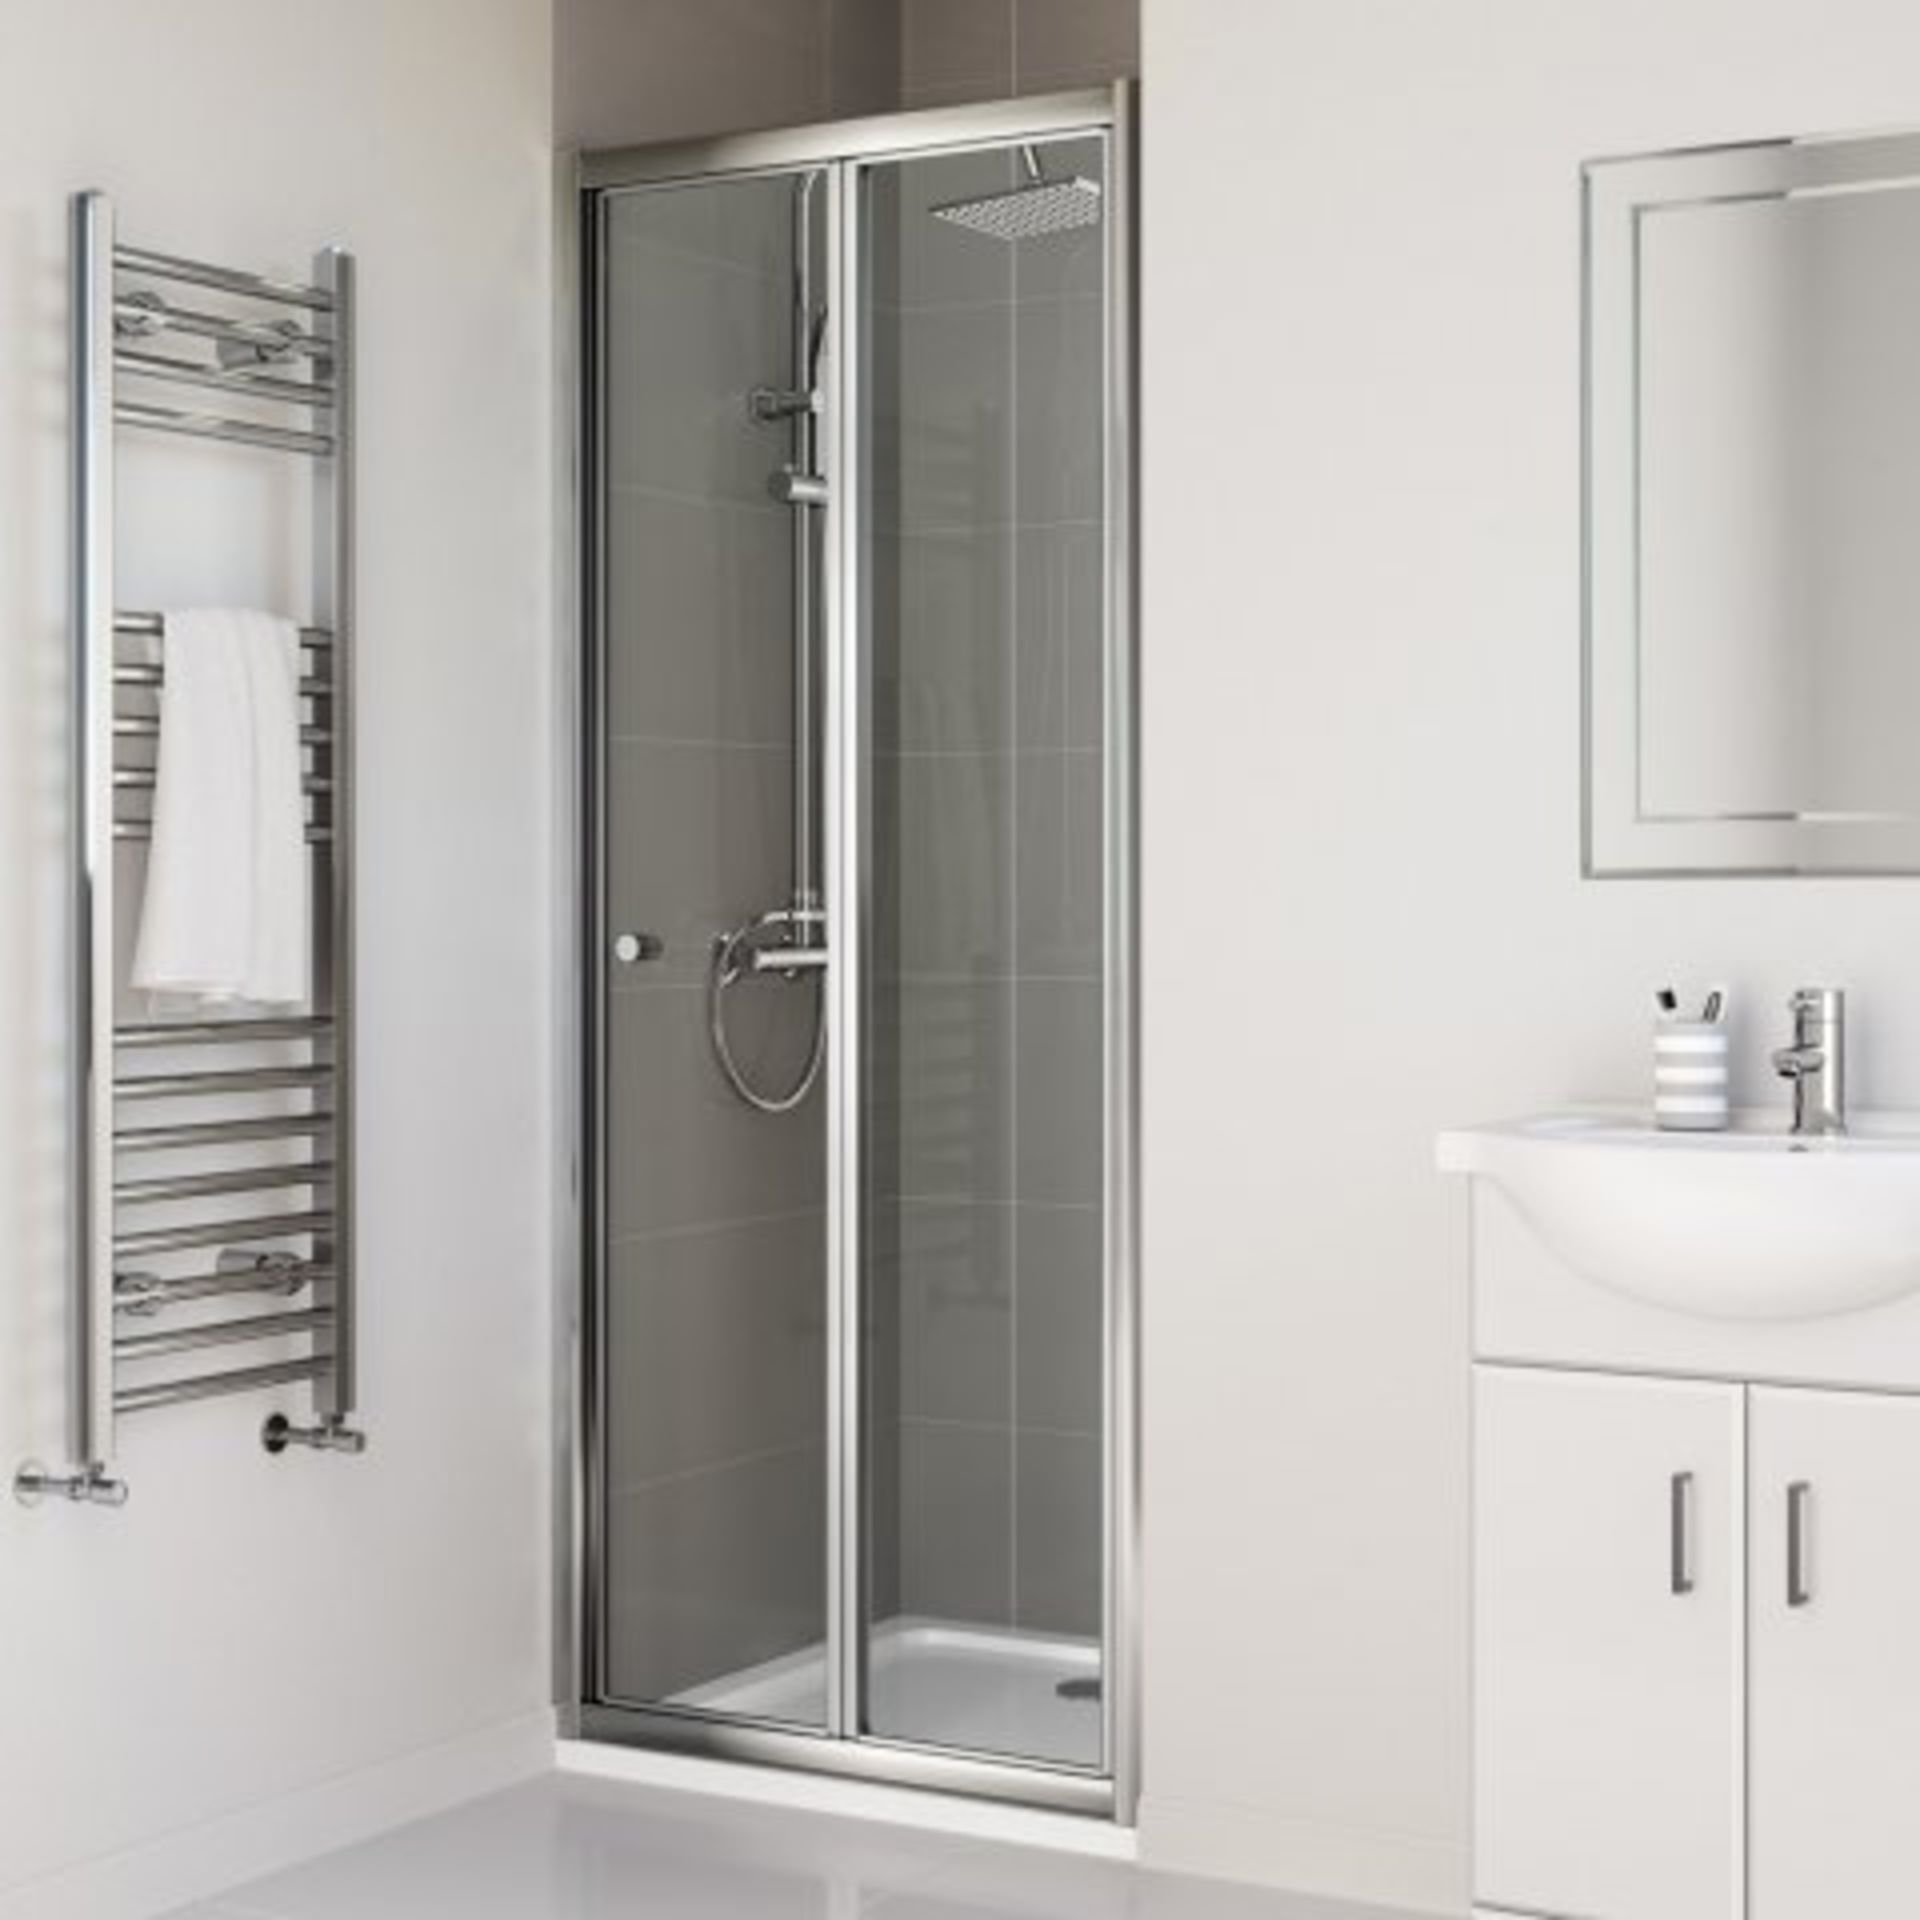 (Z65) 760mm - Elements Bi Fold Shower Door Do you have an awkward nook or a tricky recess in your